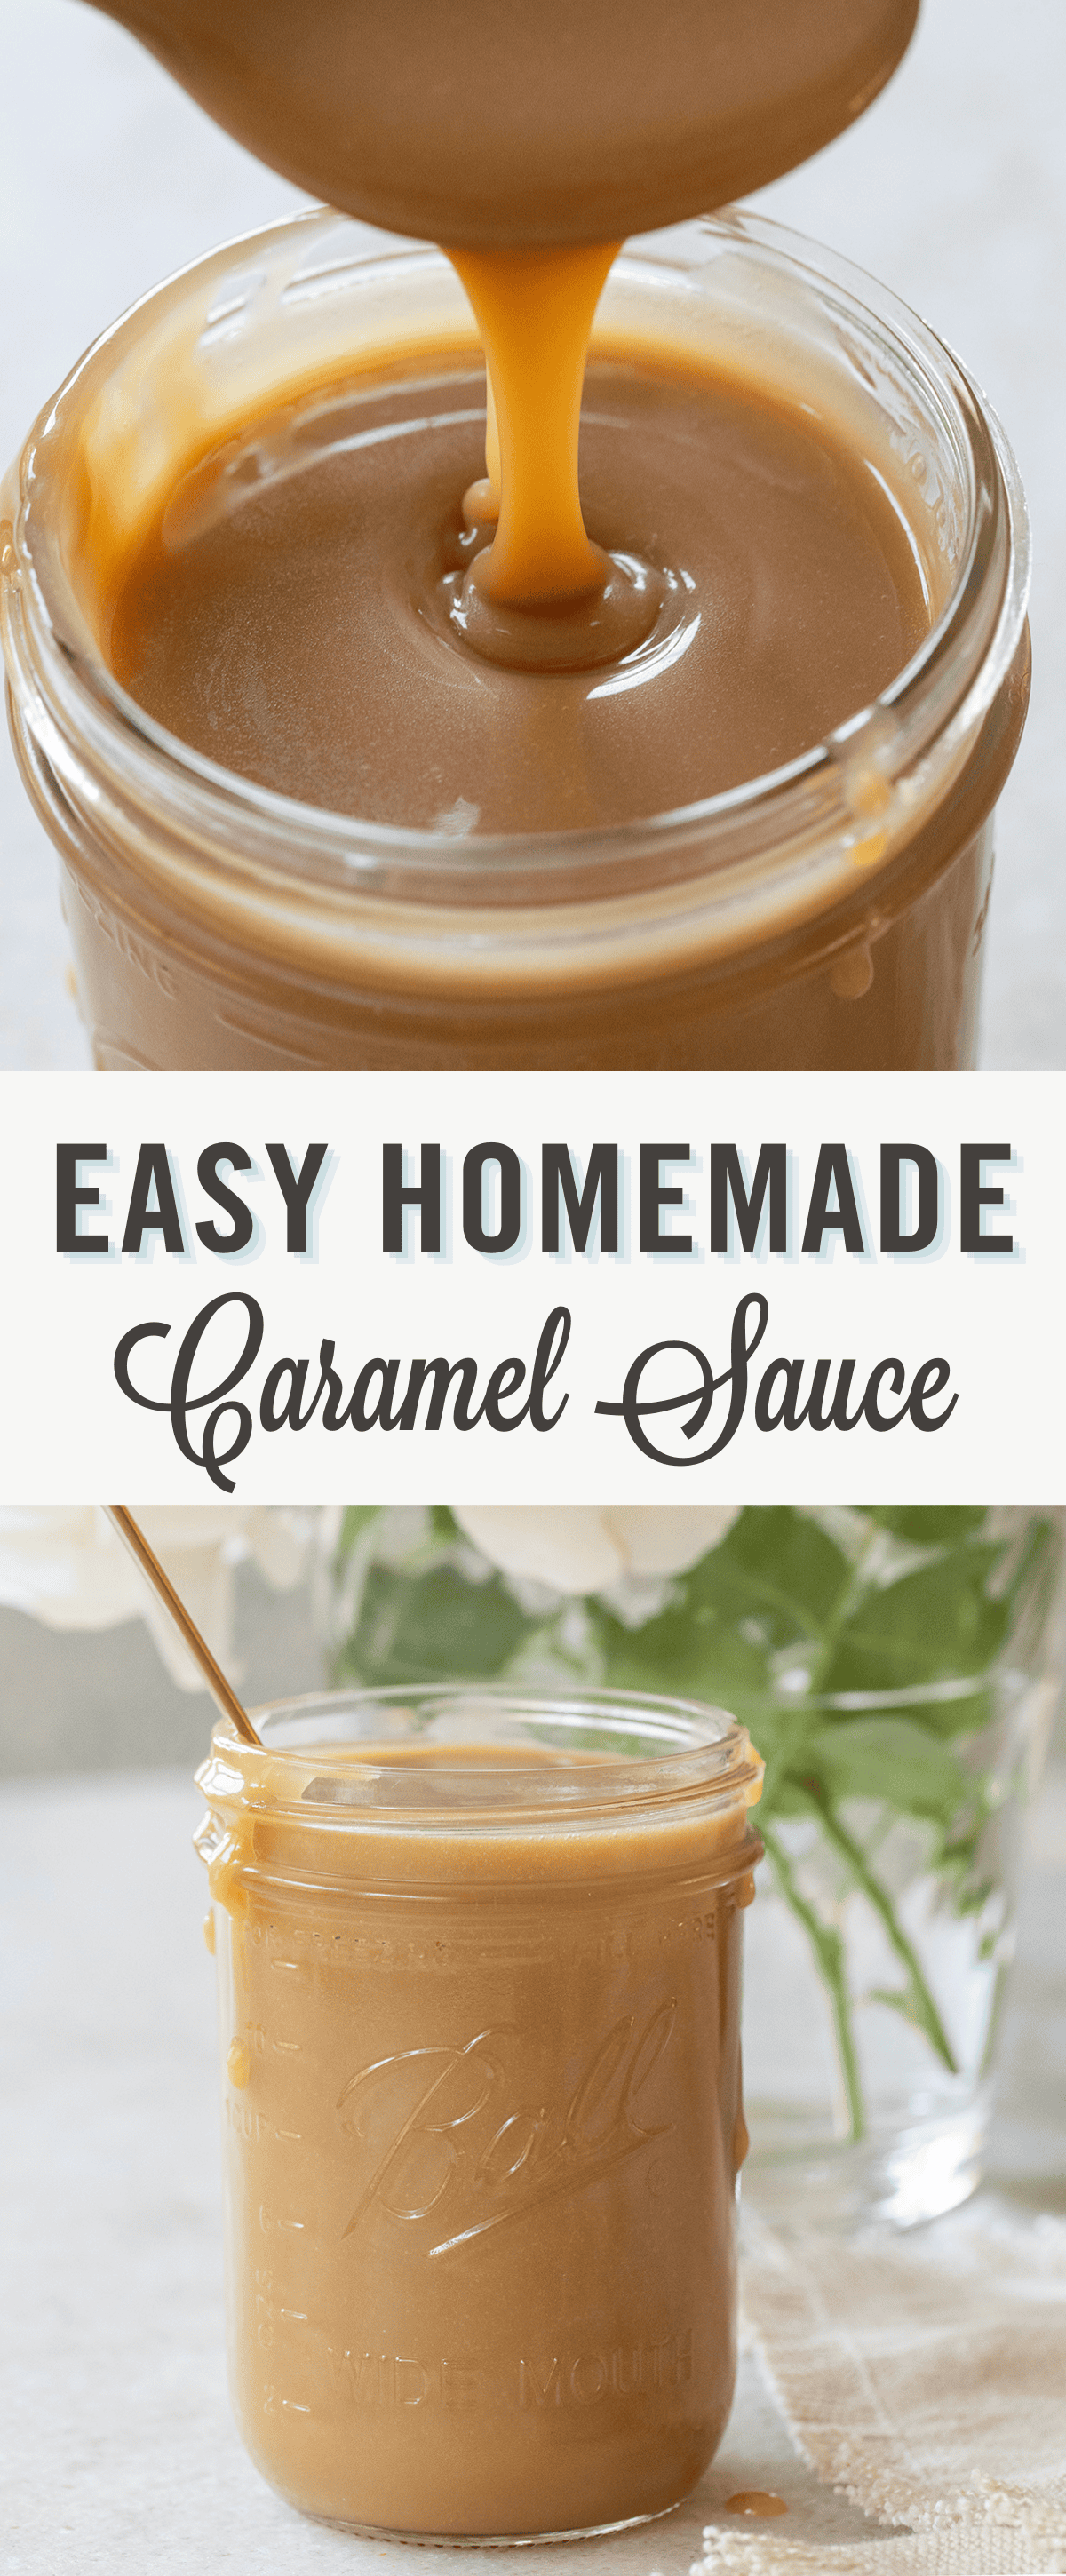 Homemade caramel sauce recipe that is easy to make without any tools. 